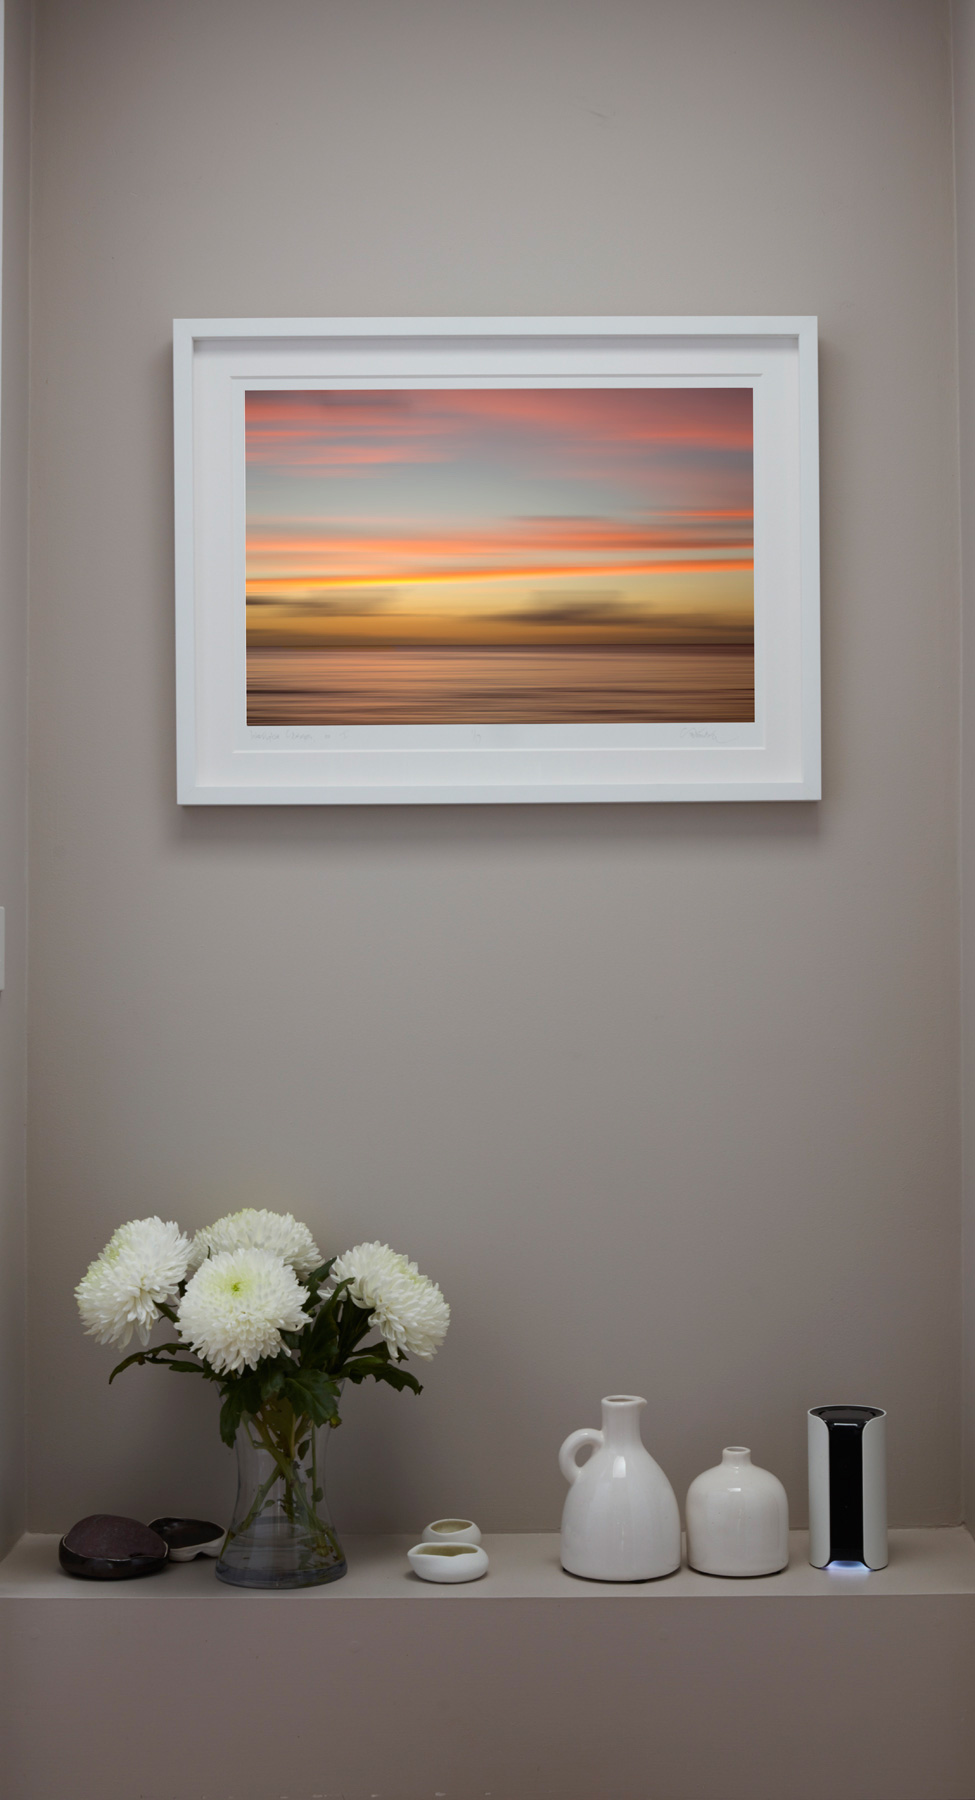 Interrupted Seascapes framed with a window mount in a box frame